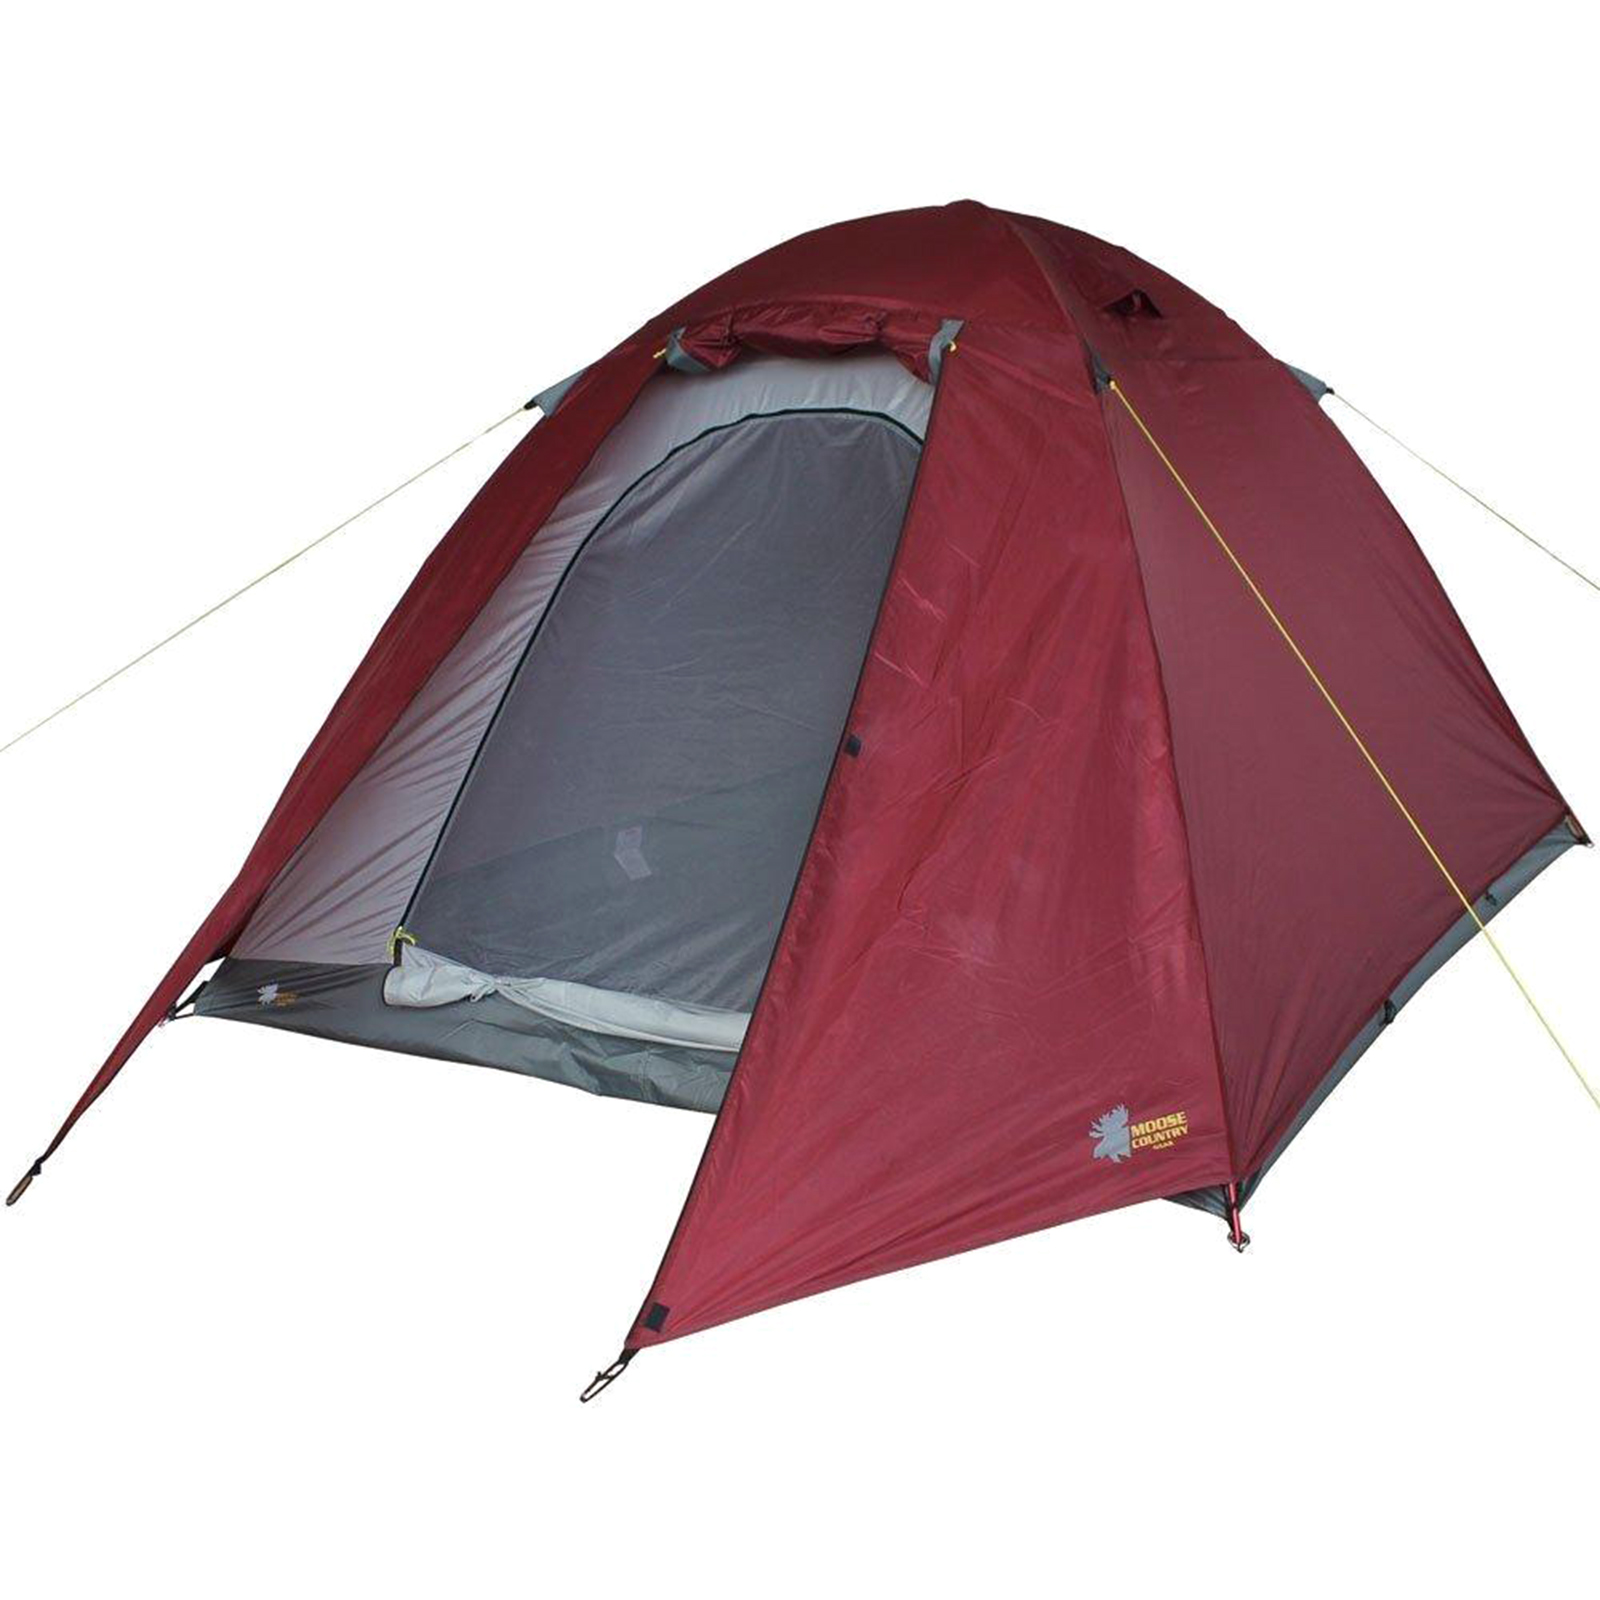 Moose Country Gear Set of 2 Basecamp 4 Season Expedition Tent